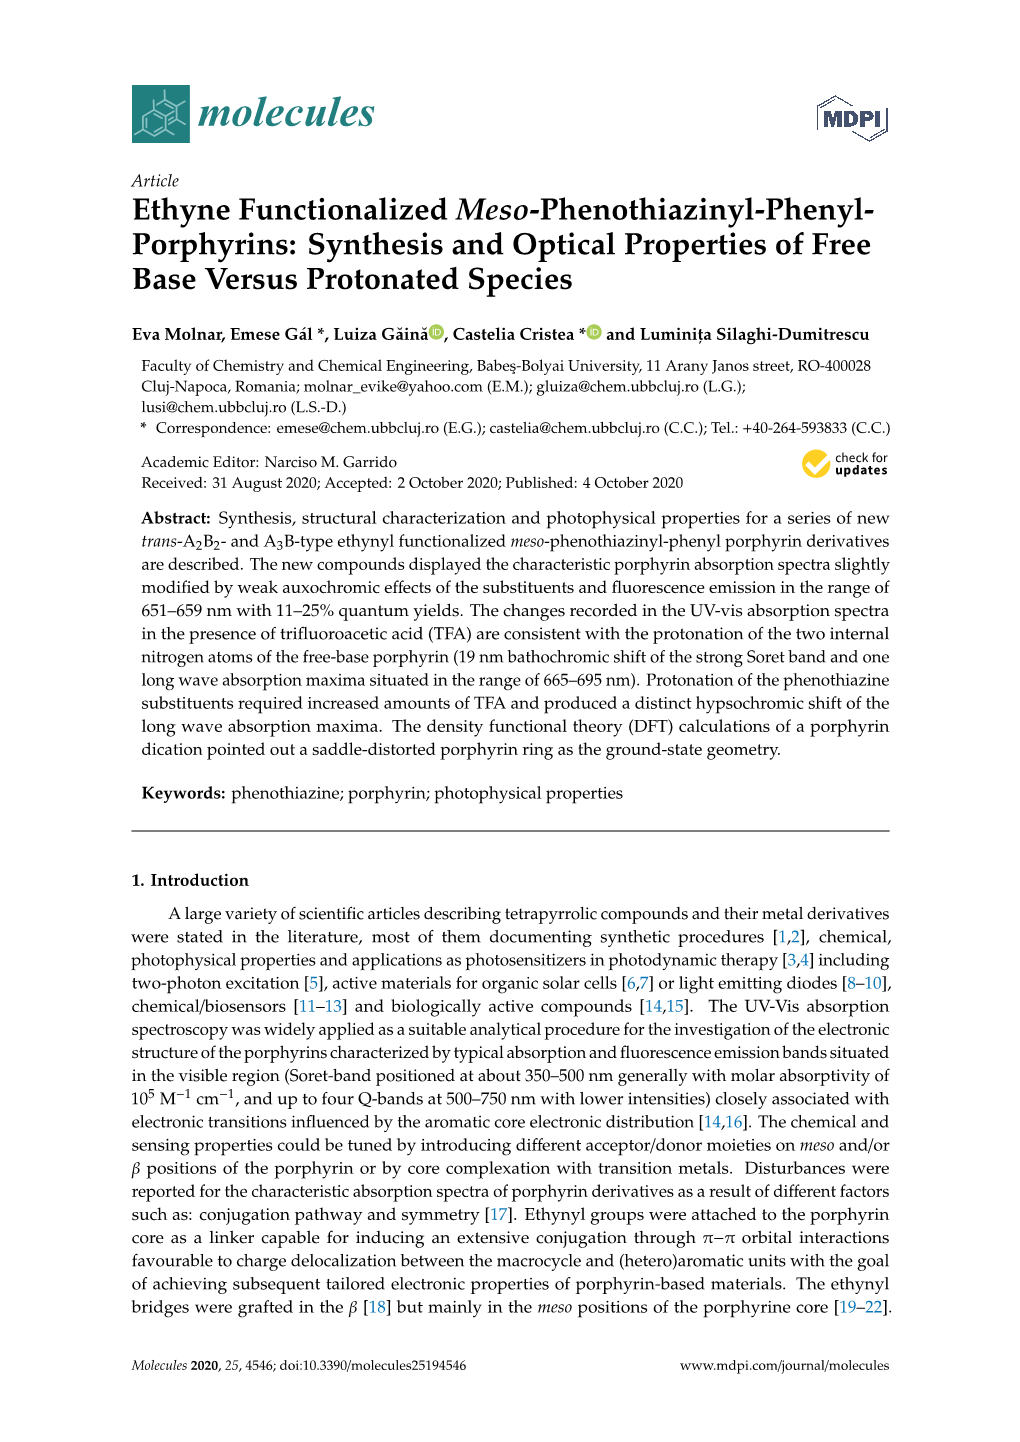 Synthesis and Optical Properties of Free Base Versus Protonated Species